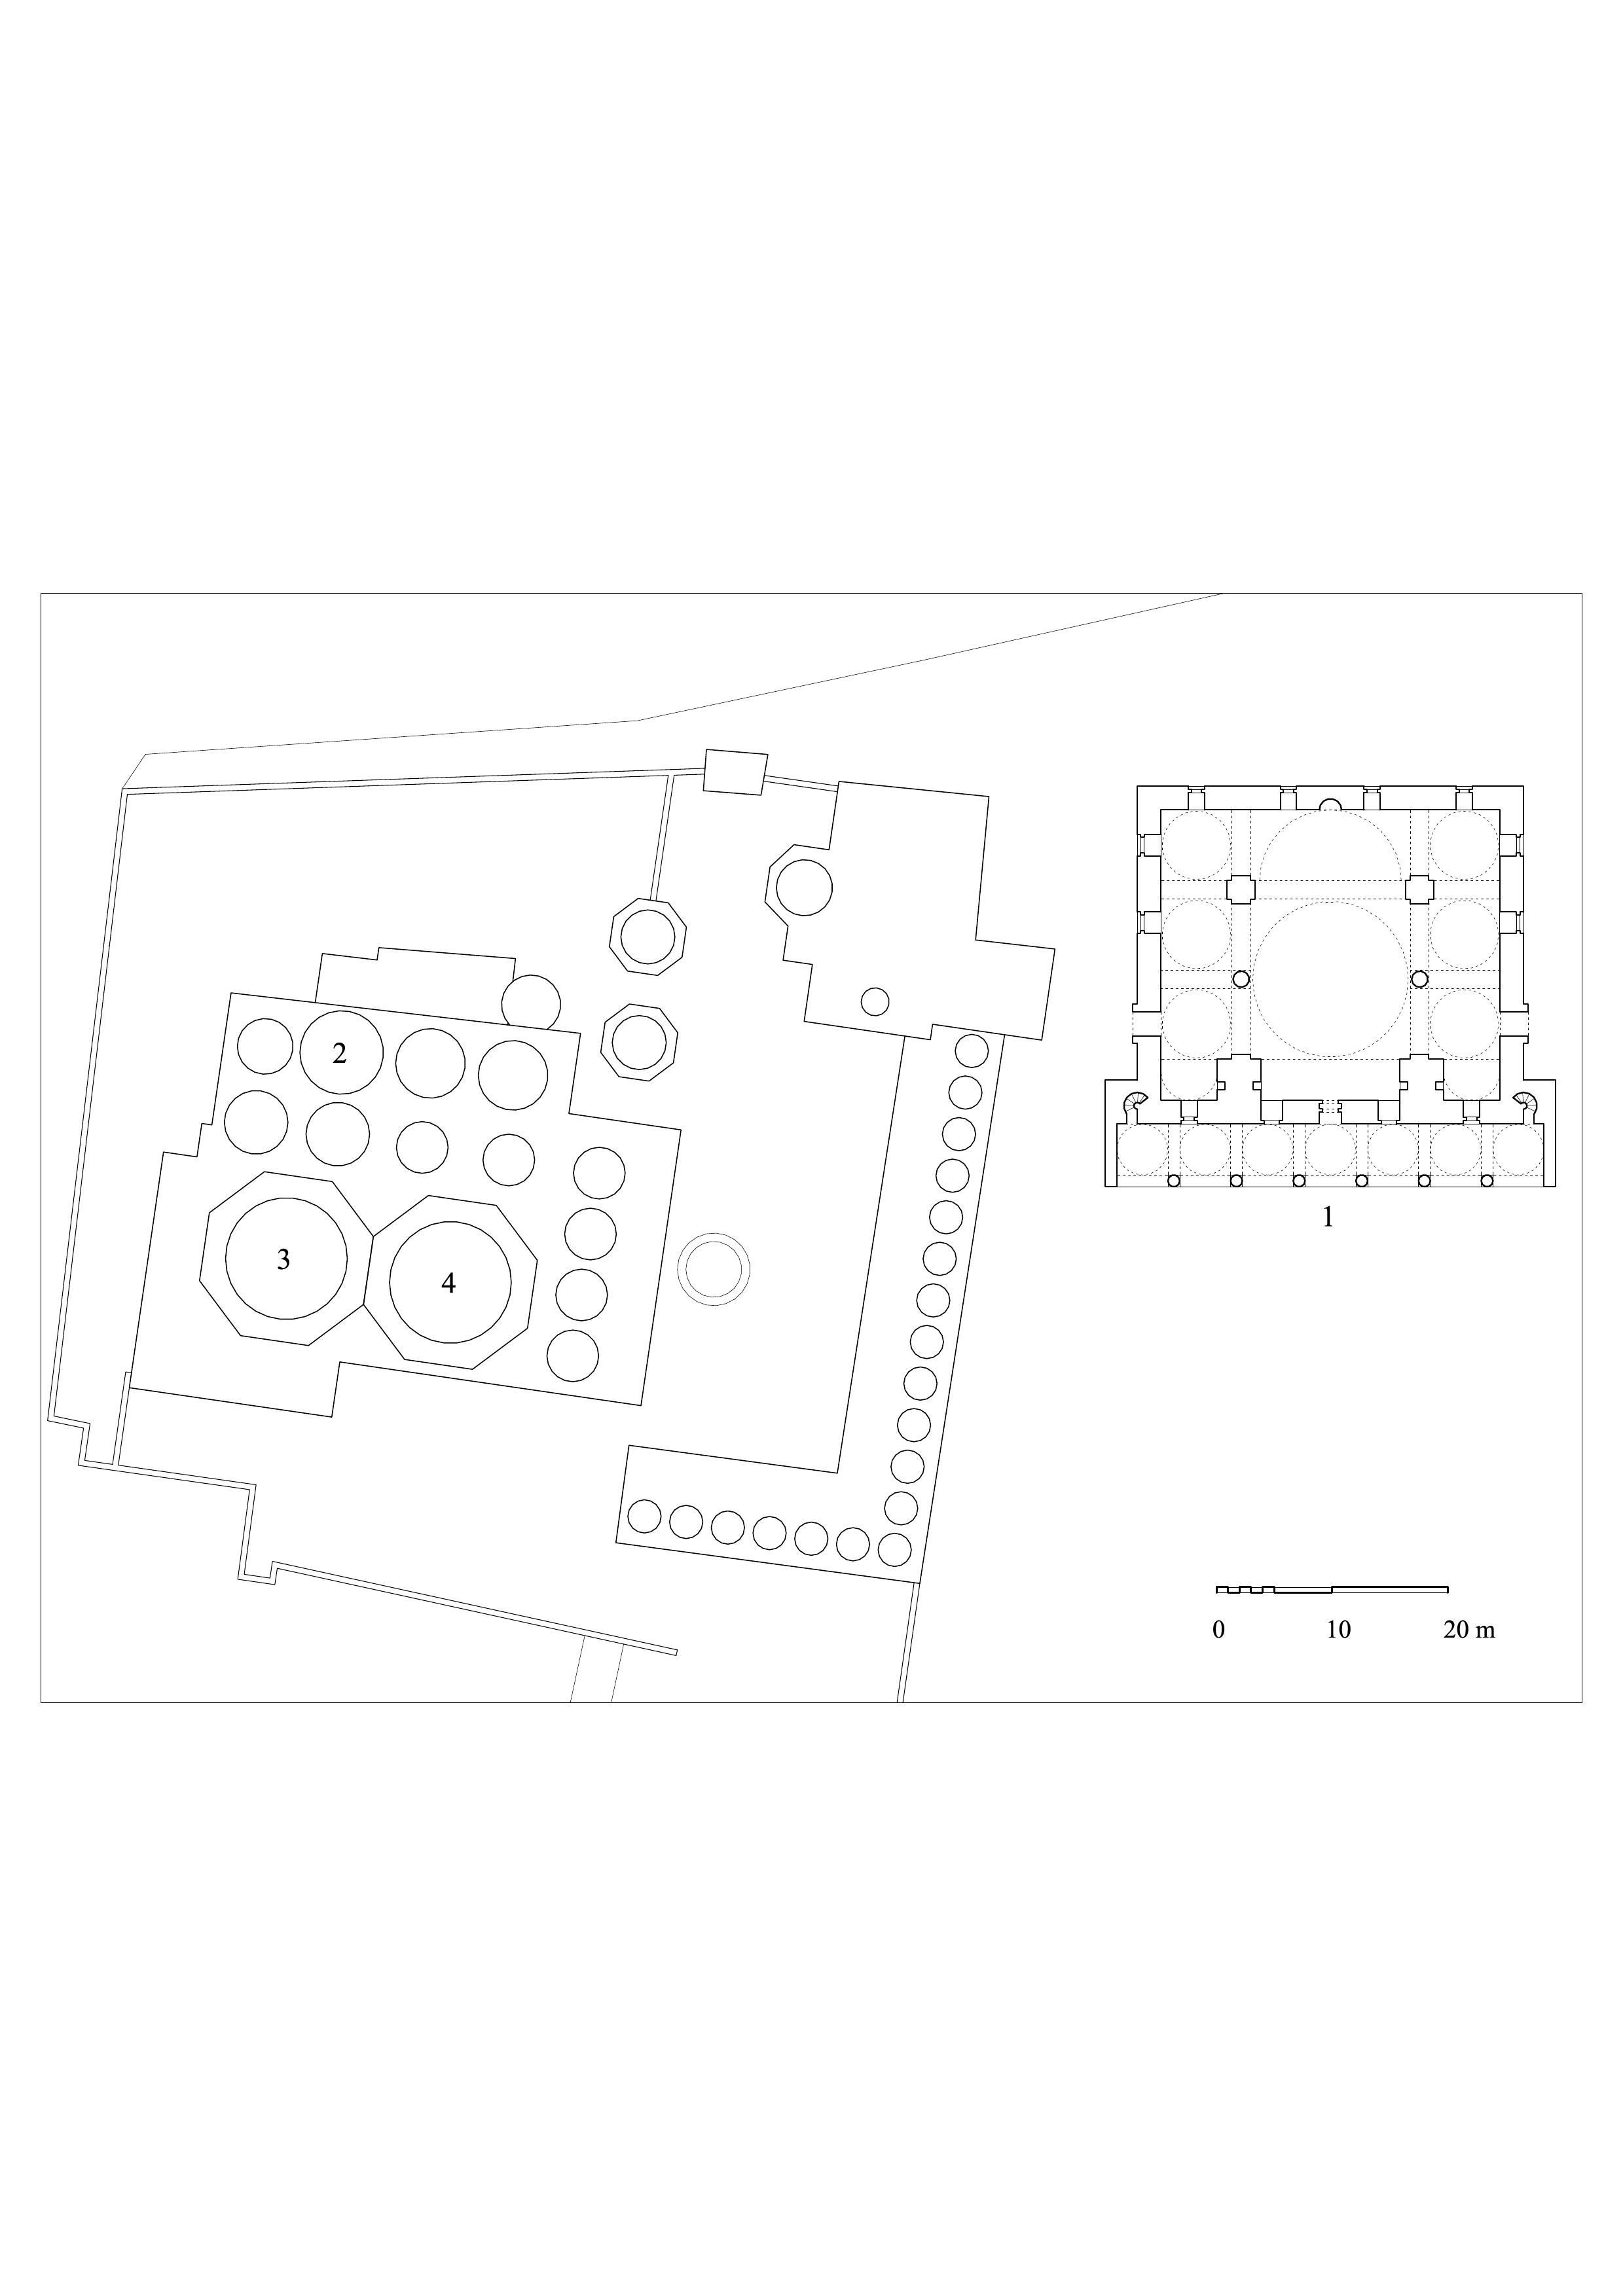 Selimiye Camii - Floor plan of mosque (1) and adjoining Mevlana Complex, showing (2) Mevlana Tomb, (3) ritual hall of convent, (4) masjid. DWG file in AutoCAD 2000 format. Click the download button to download a zipped file containing the .dwg file.